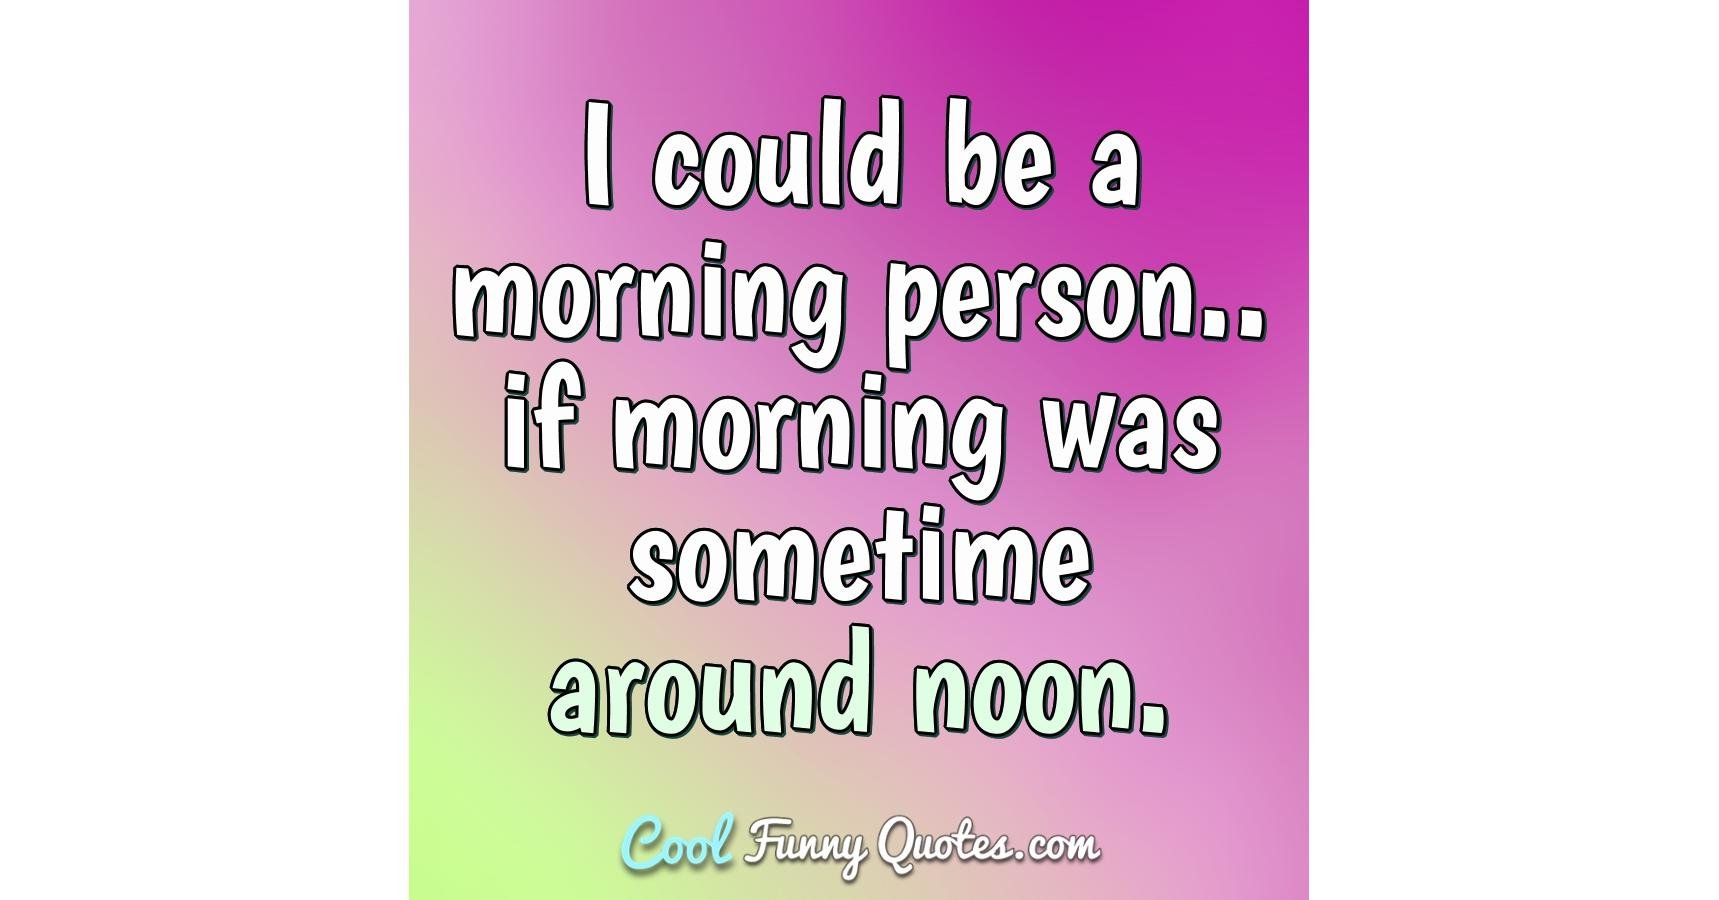 I could be a morning person.. if morning was sometime around noon.